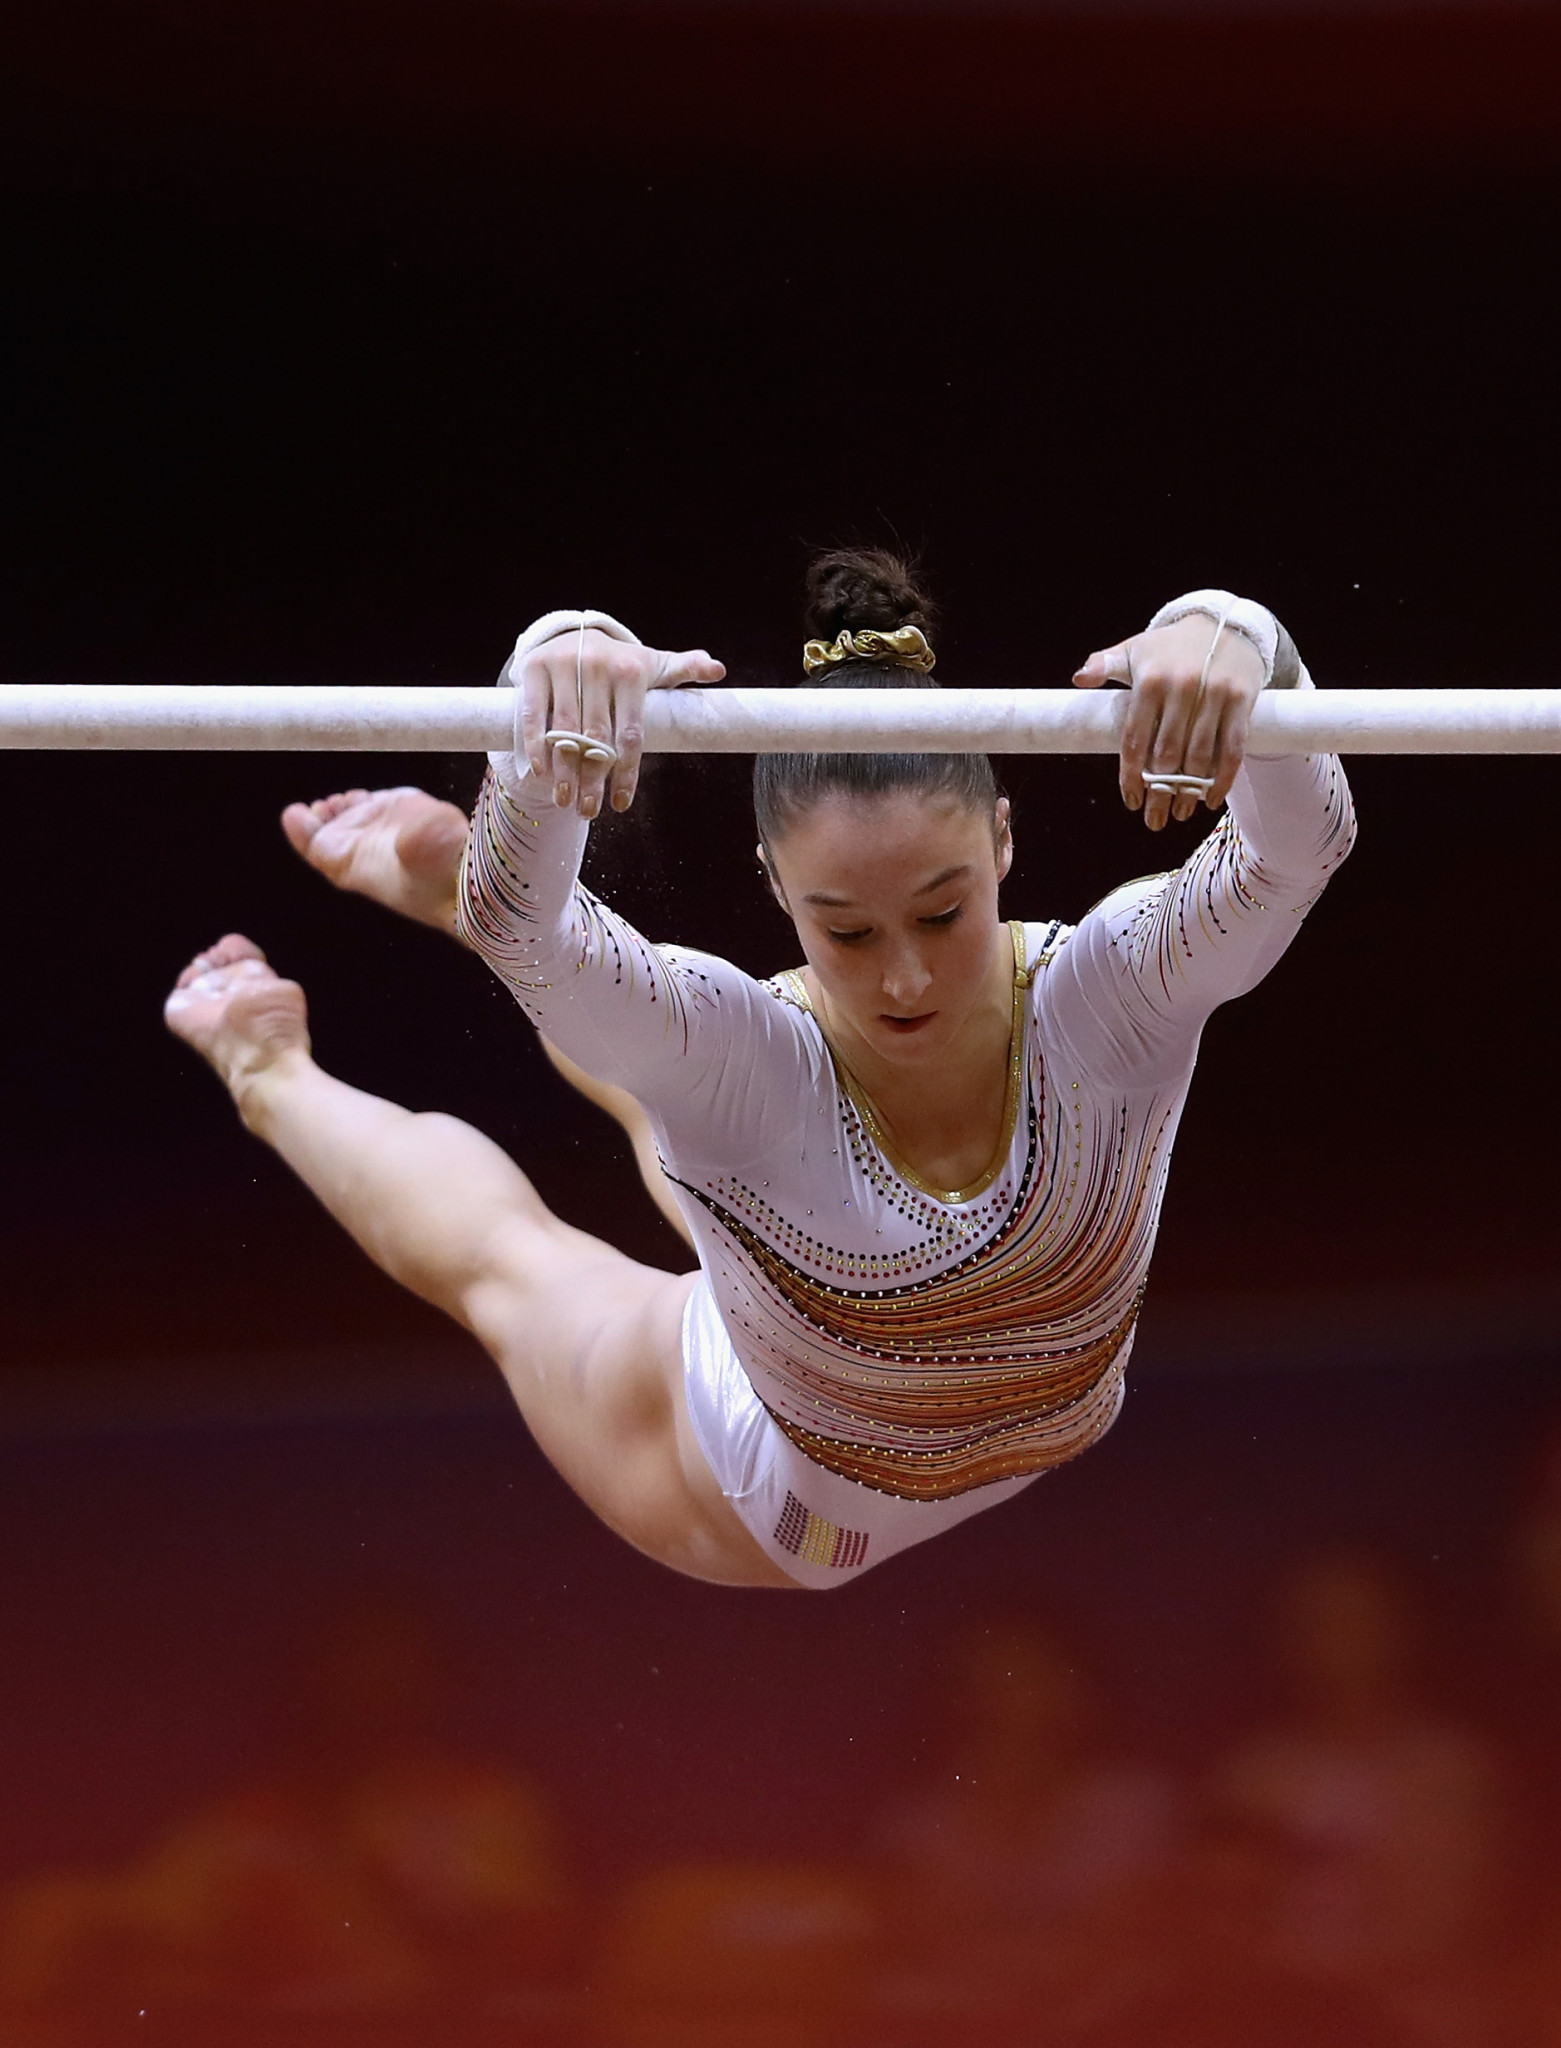 Belgium's Nina Derwael finished second in the uneven bars ©Getty Images